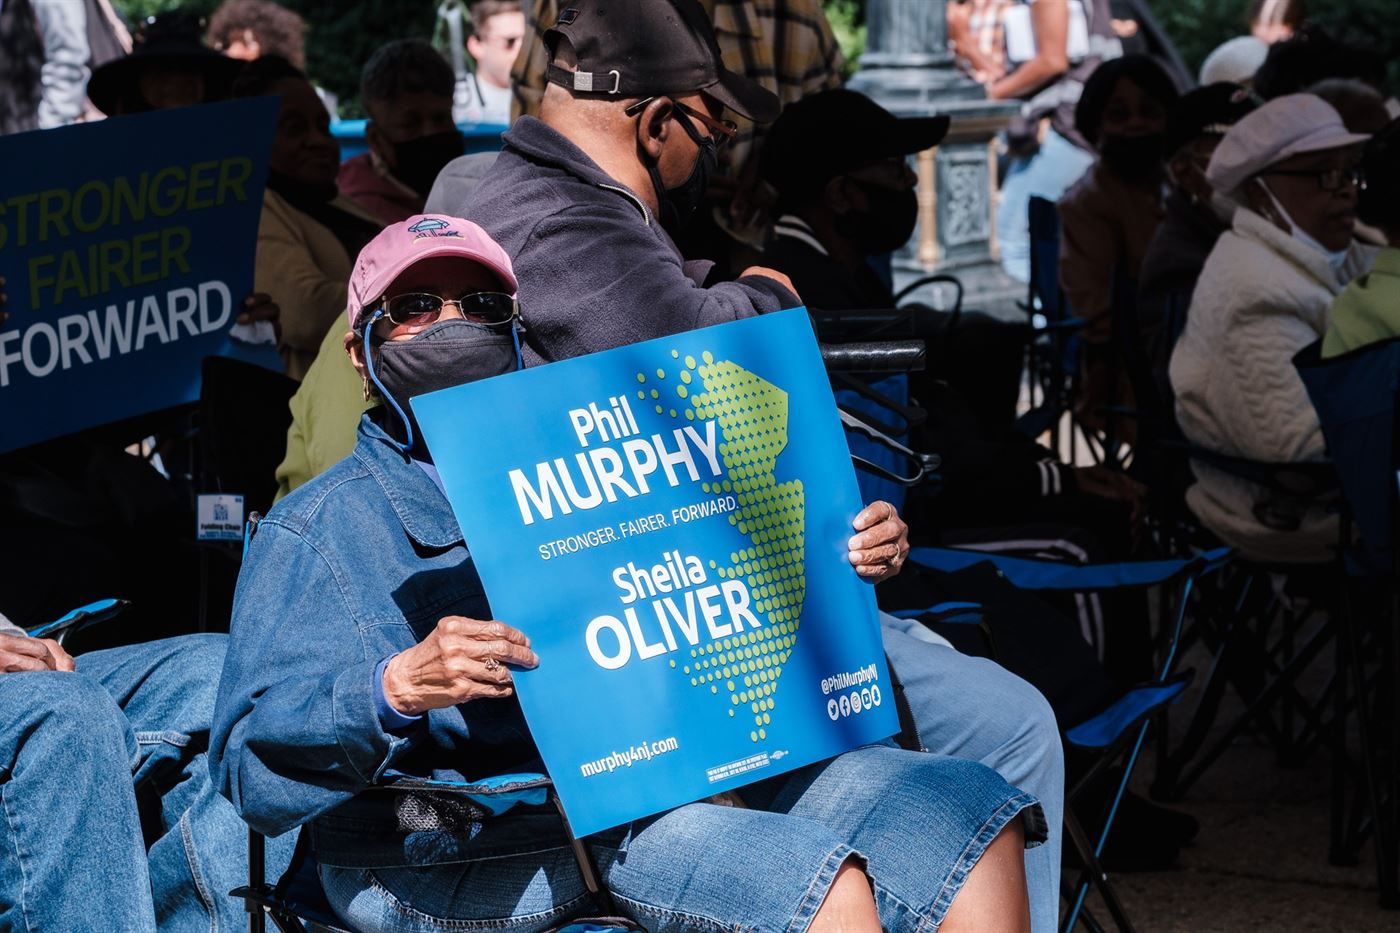 One of the many attendees showing their support to Phil Murphy and Sheila Oliver. Michael Callejas | The Montclarion